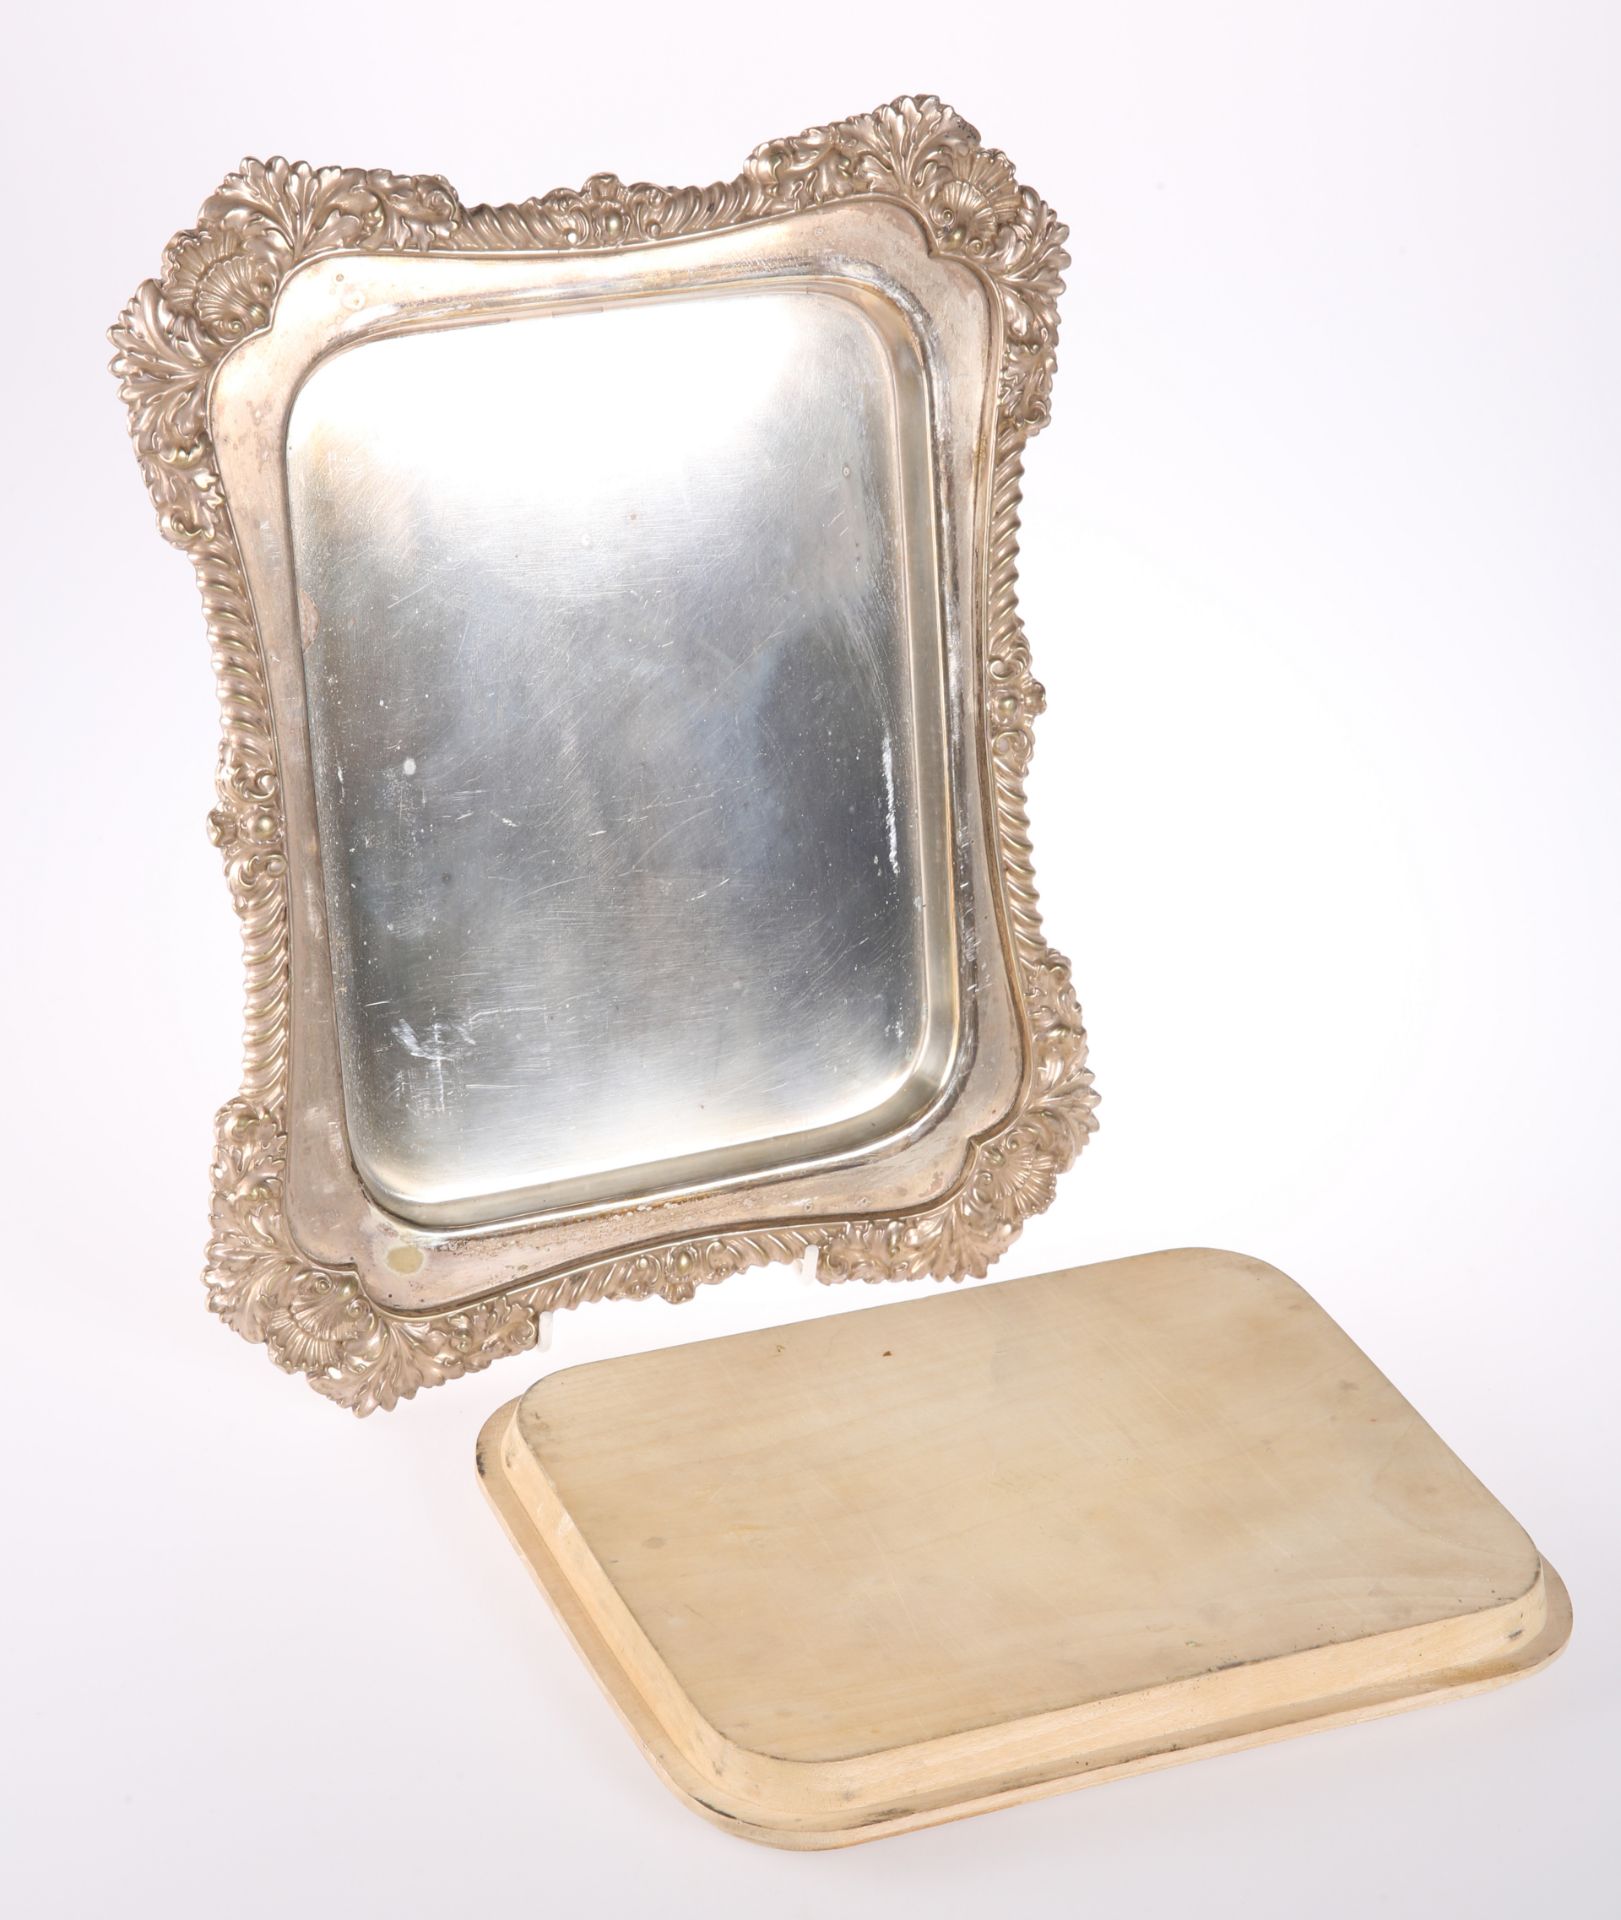 A WOODEN BREAD BOARD WITH A WALKER & HALL SILVER-PLATED SURROUND